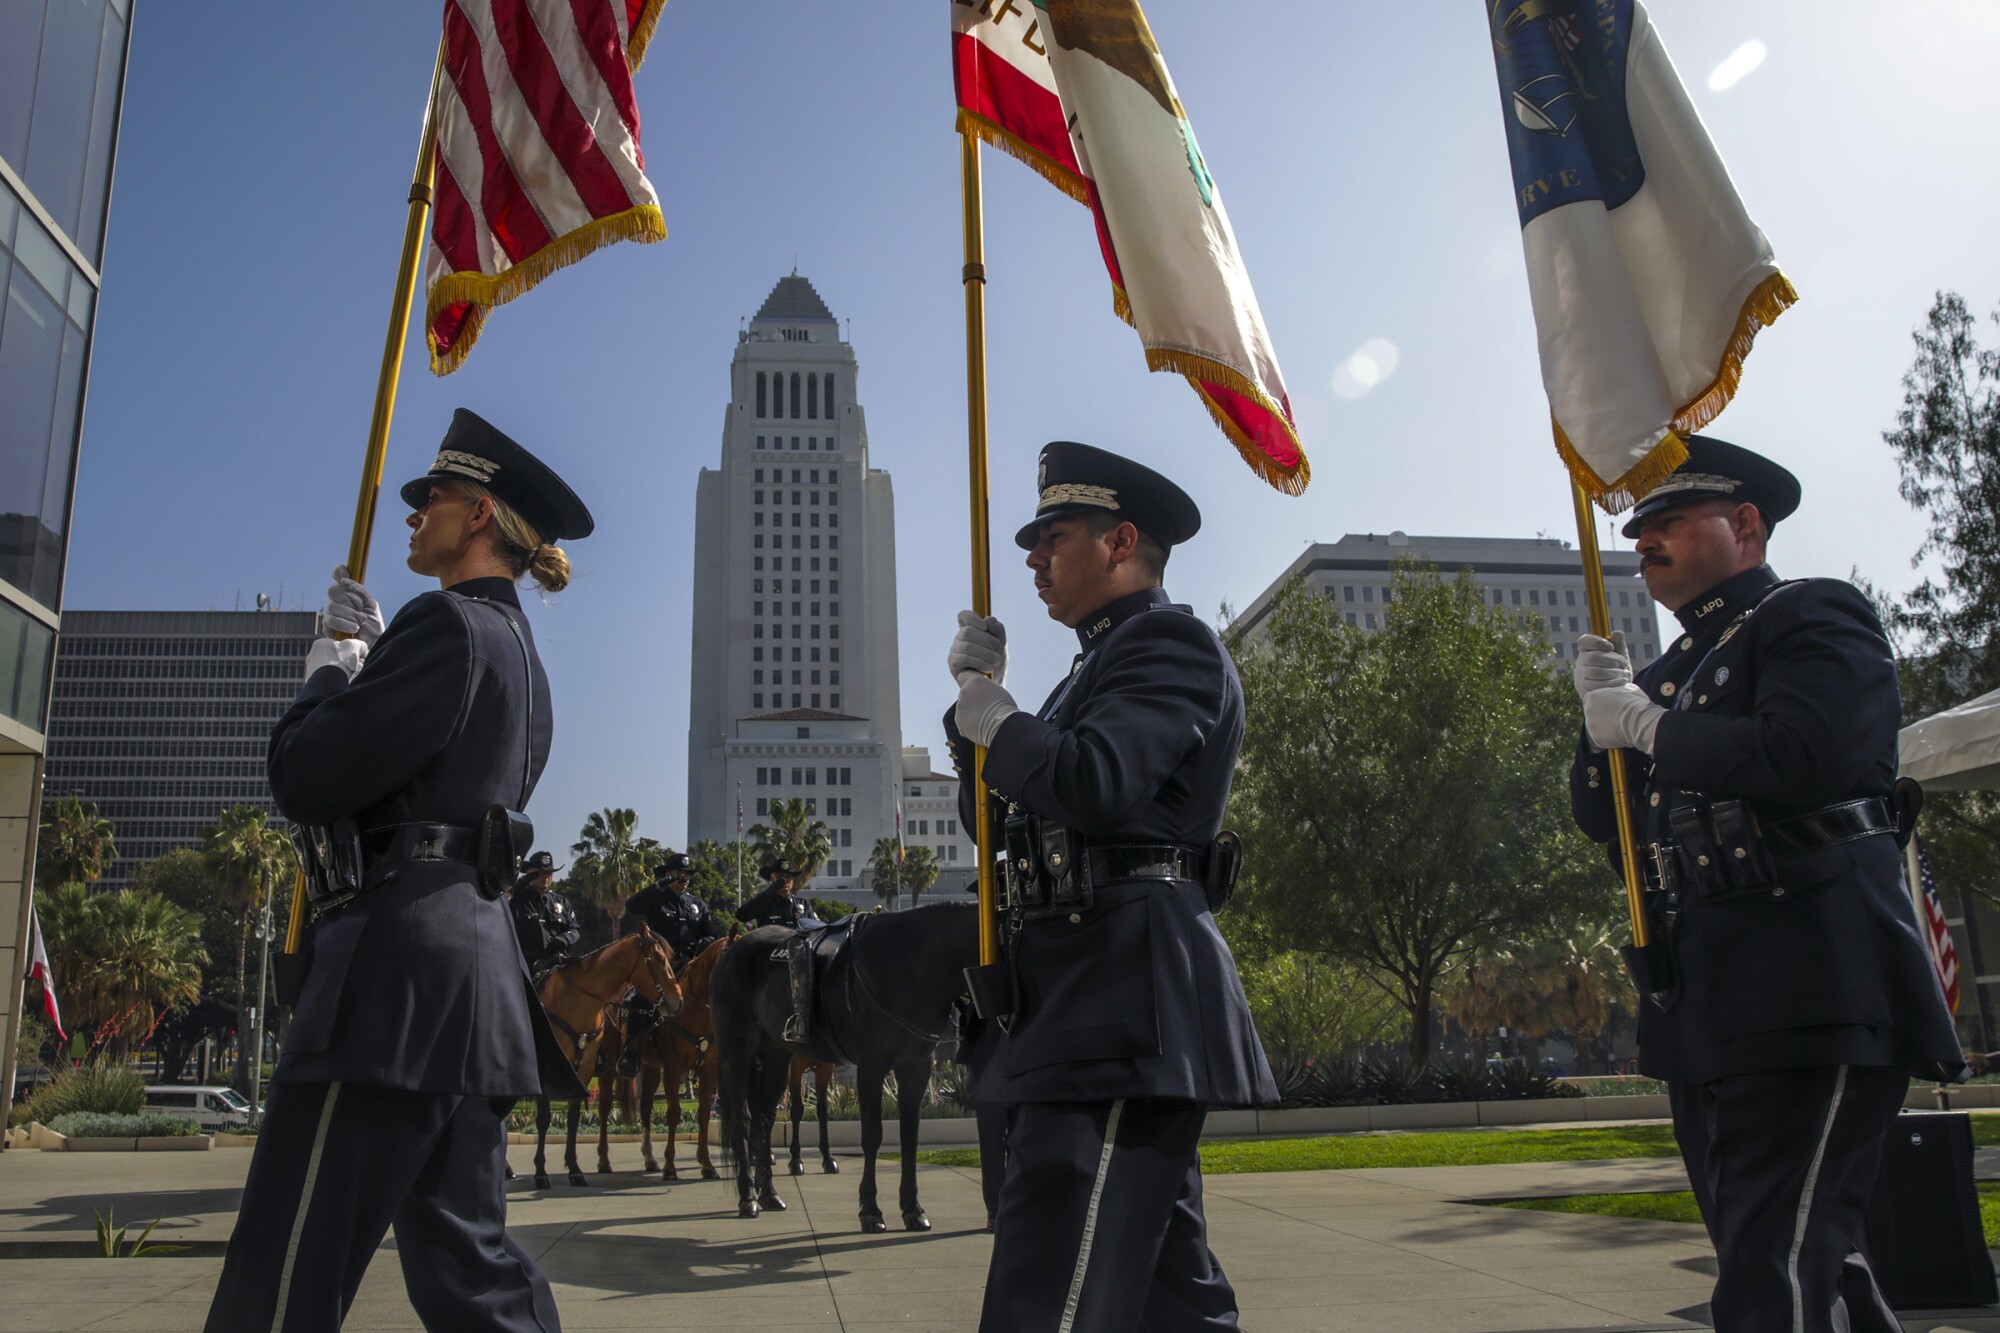 LAPD color guard at a memorial ceremony held at LAPD headquarters.